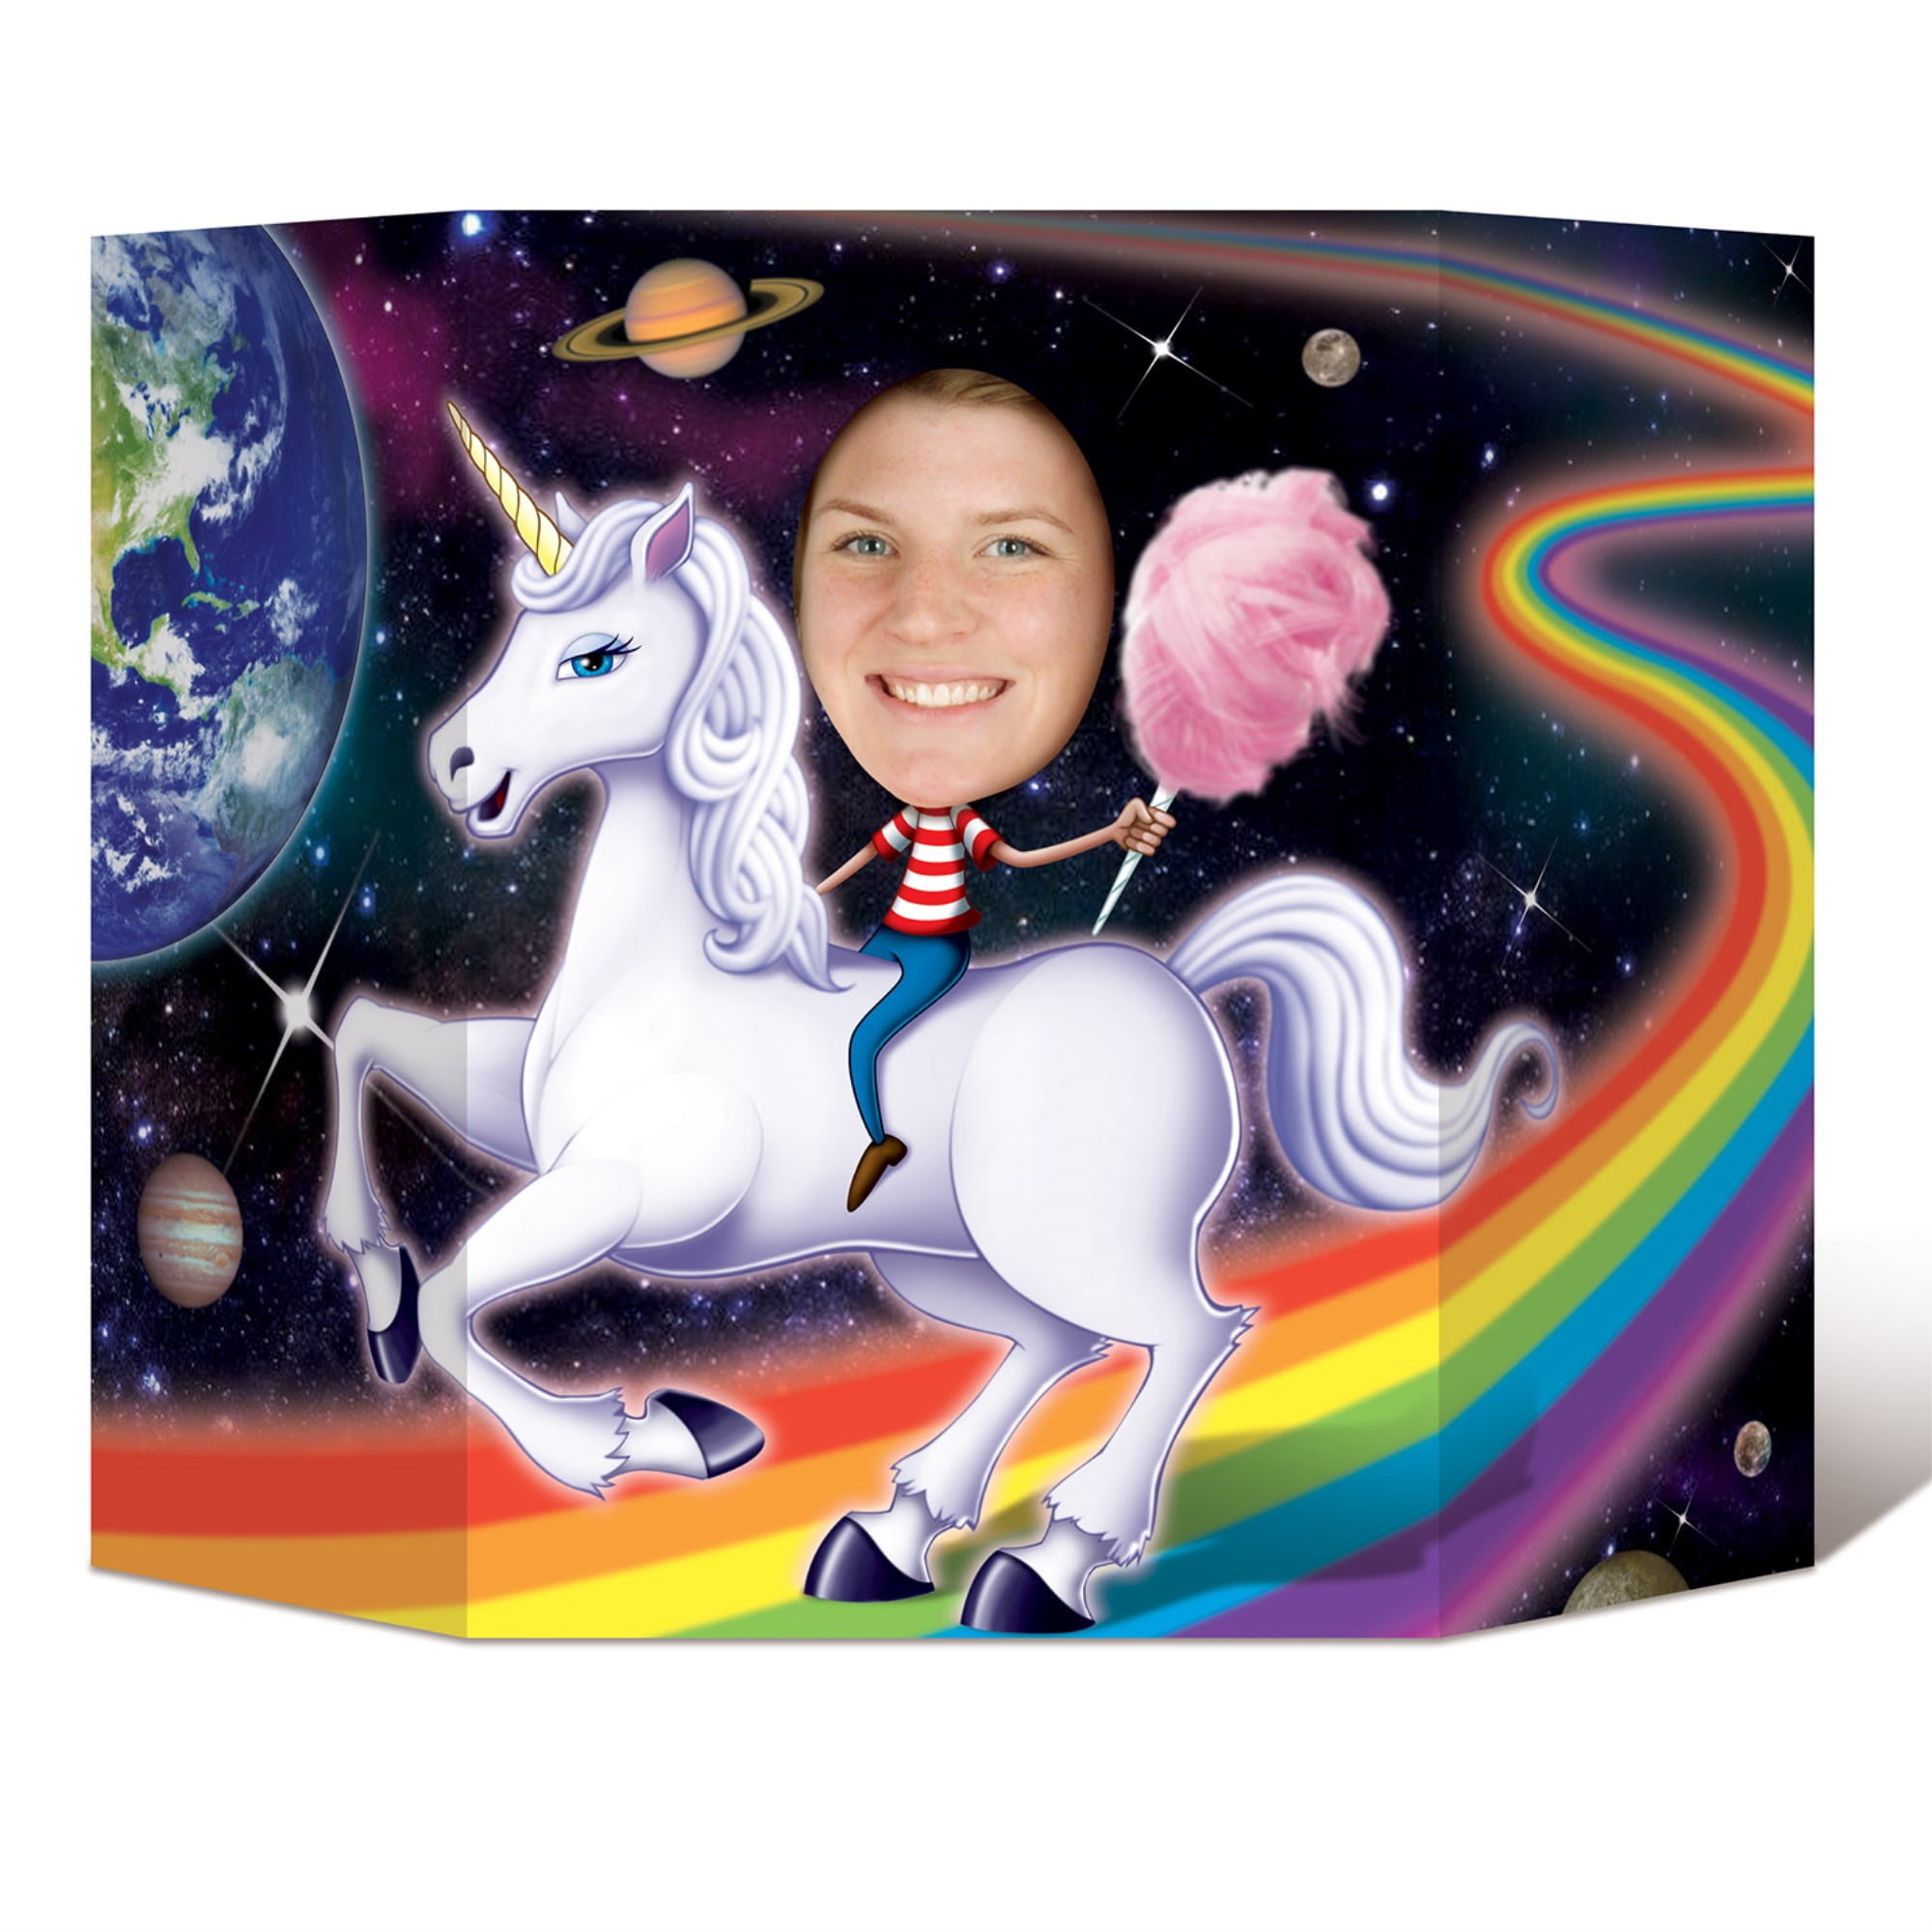 Picture of Beistle 53486 3 ft. 1 in. x 25 in. Unicorn Photo Prop - Pack of 6